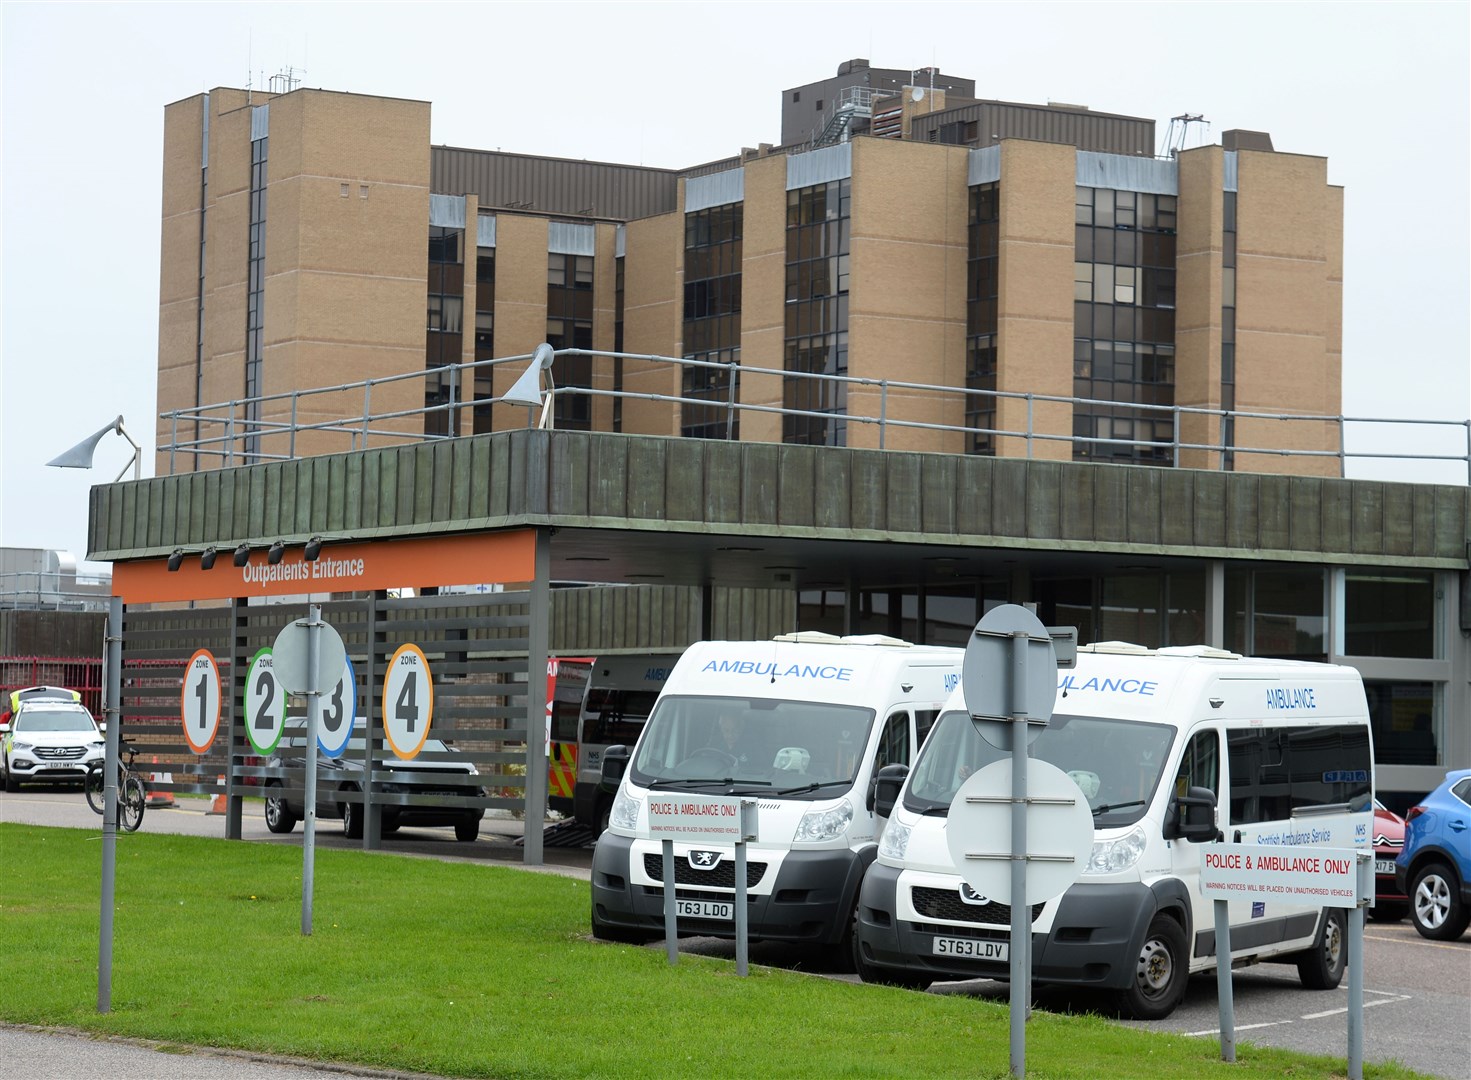 Staff at Raigmore Hospital and elsewhere should now feel secure in raising any concerns.